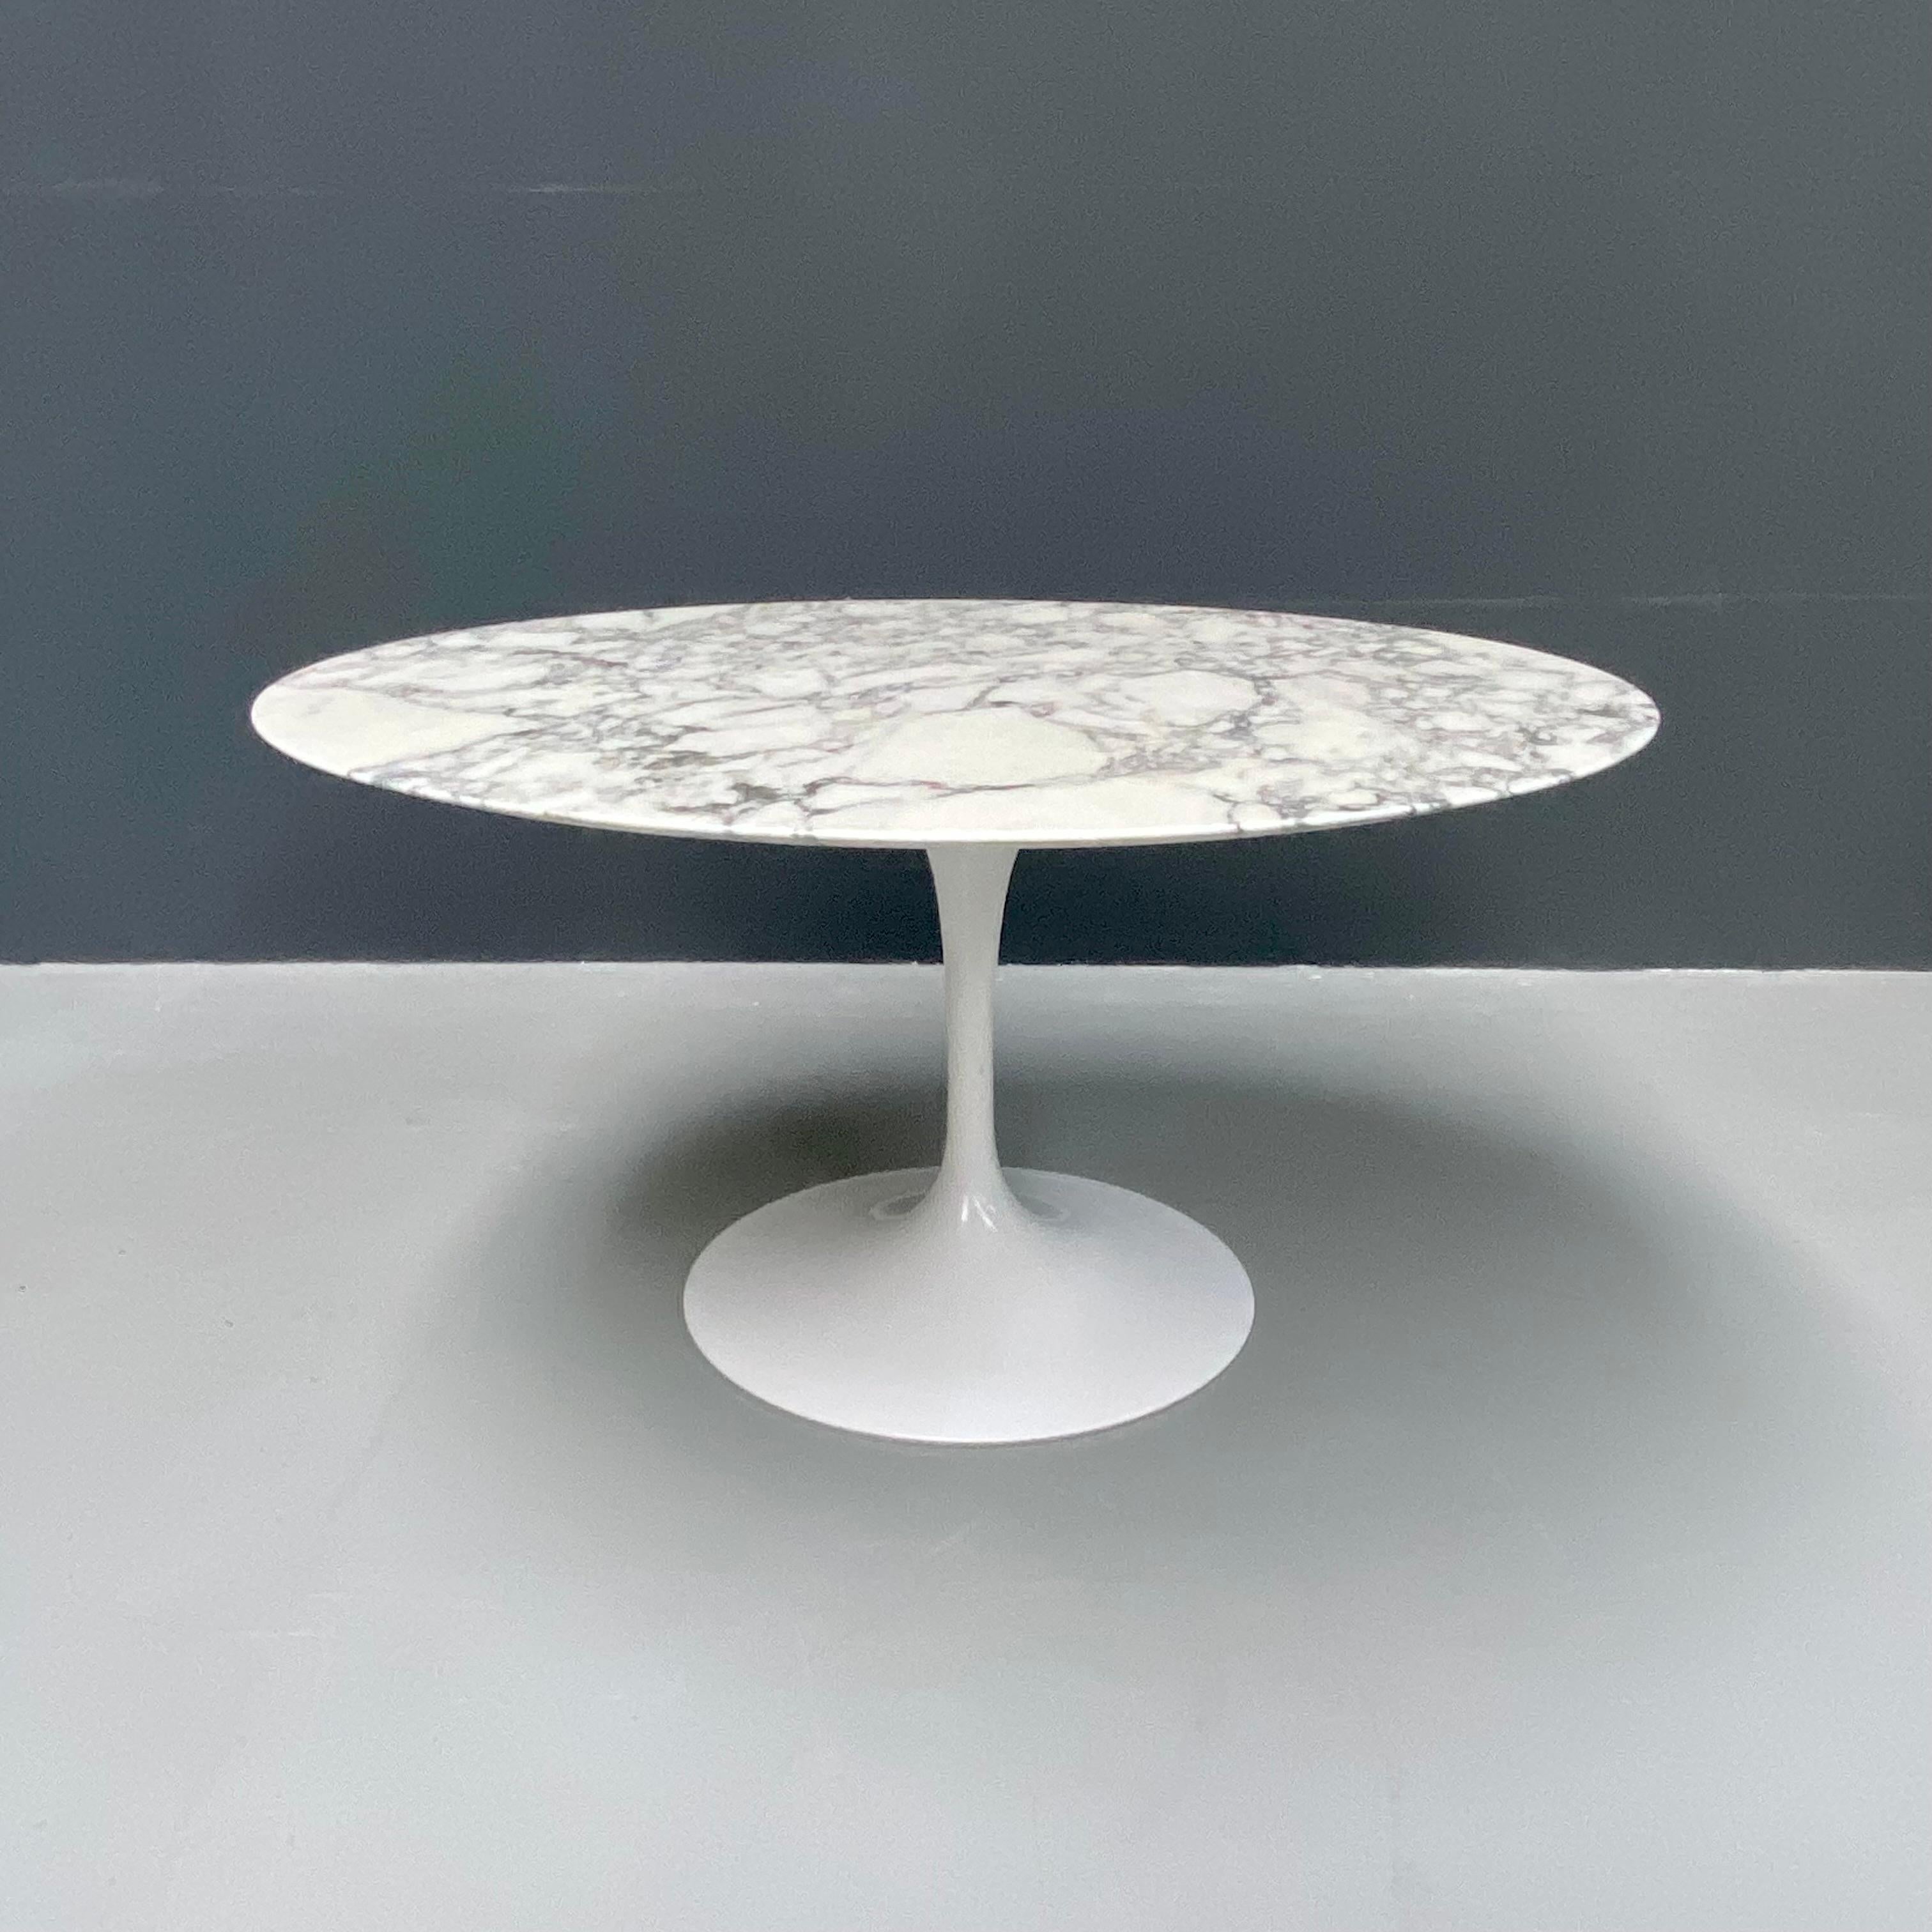 Mid-20th Century Aresbescato Marble Dining Table by Eero Saarinen for Knoll Studio For Sale